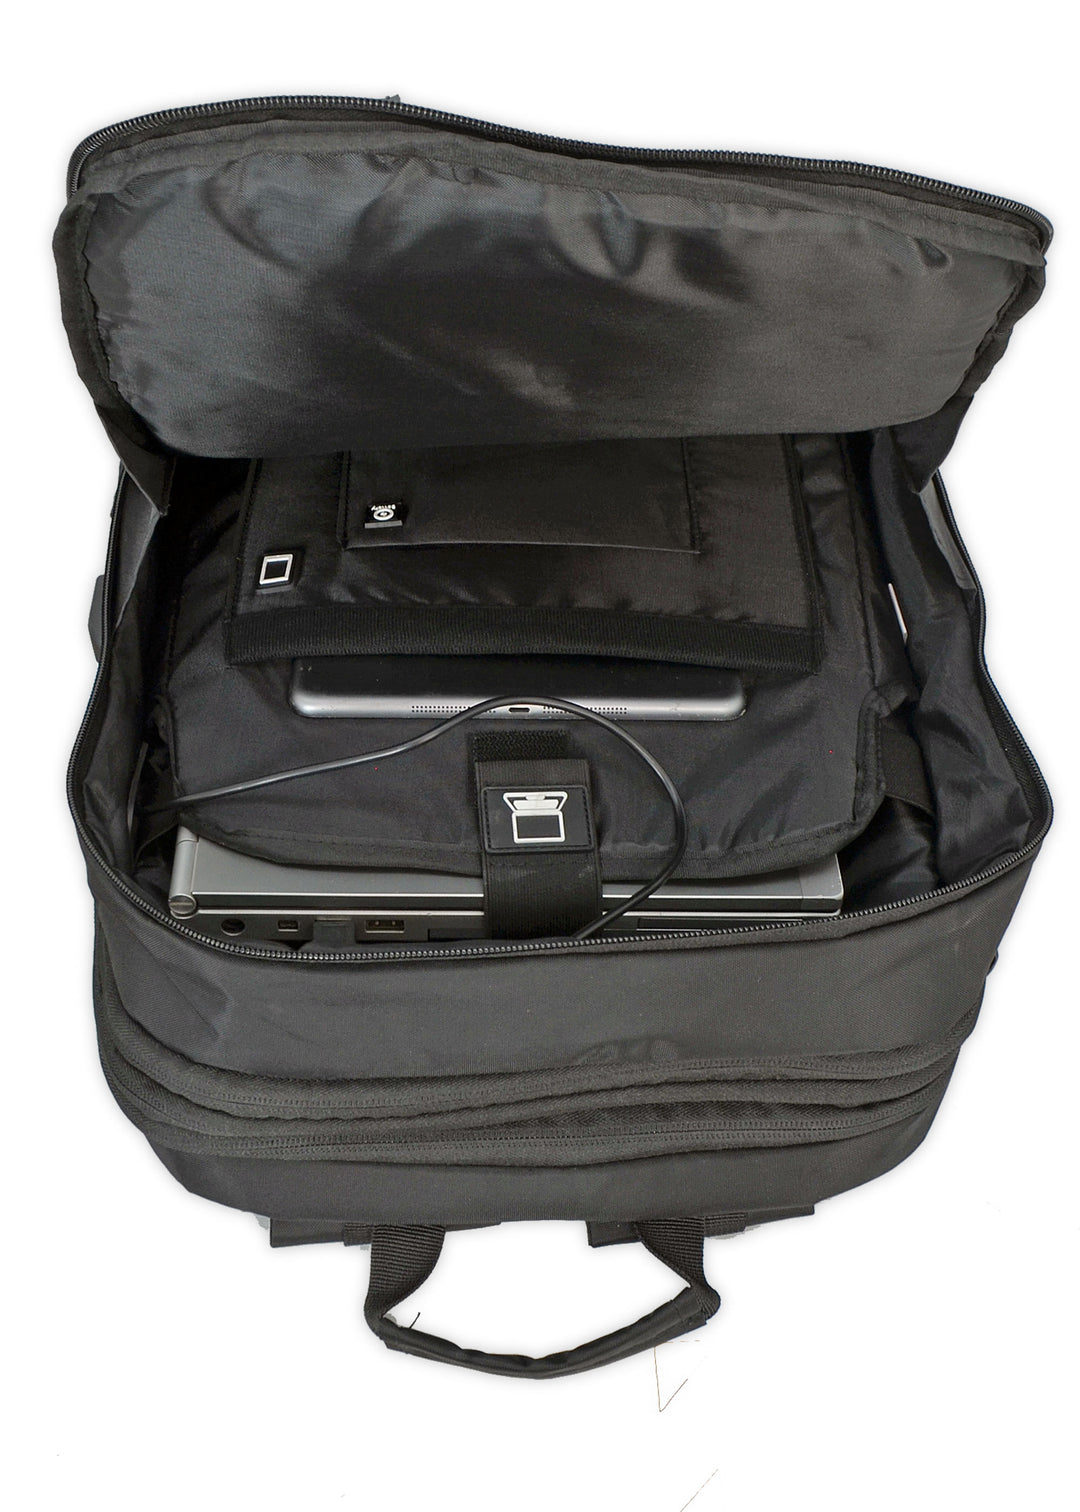 Getaway Expandable Carry-On Backpack Suitcase by Duchamp